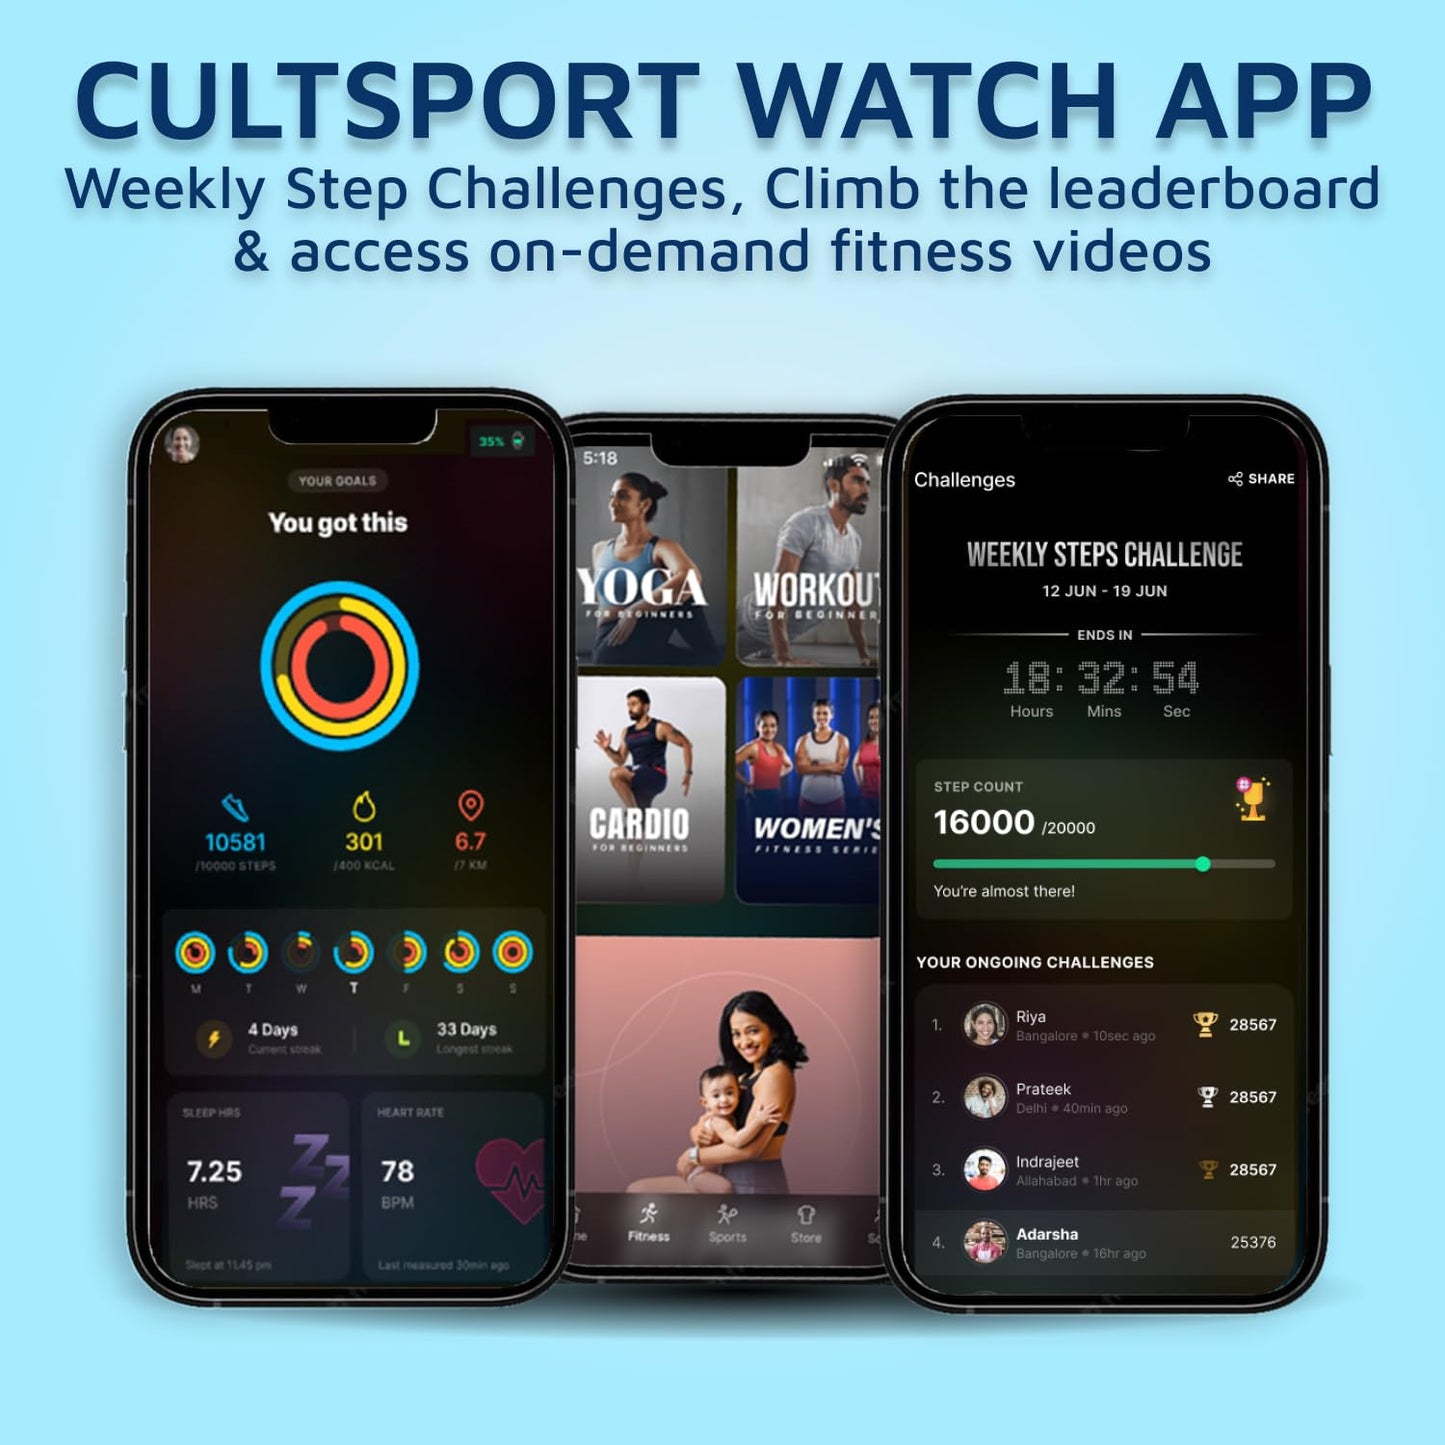 Cultsport Burn Plus 1.78" Amoled, Live Cricket Score, 368 * 448 Best-in-Class Resolution, BT Calling, Crown Control, Always on Display, 7 Days Battery Life (Rose Gold Silicone Strap)